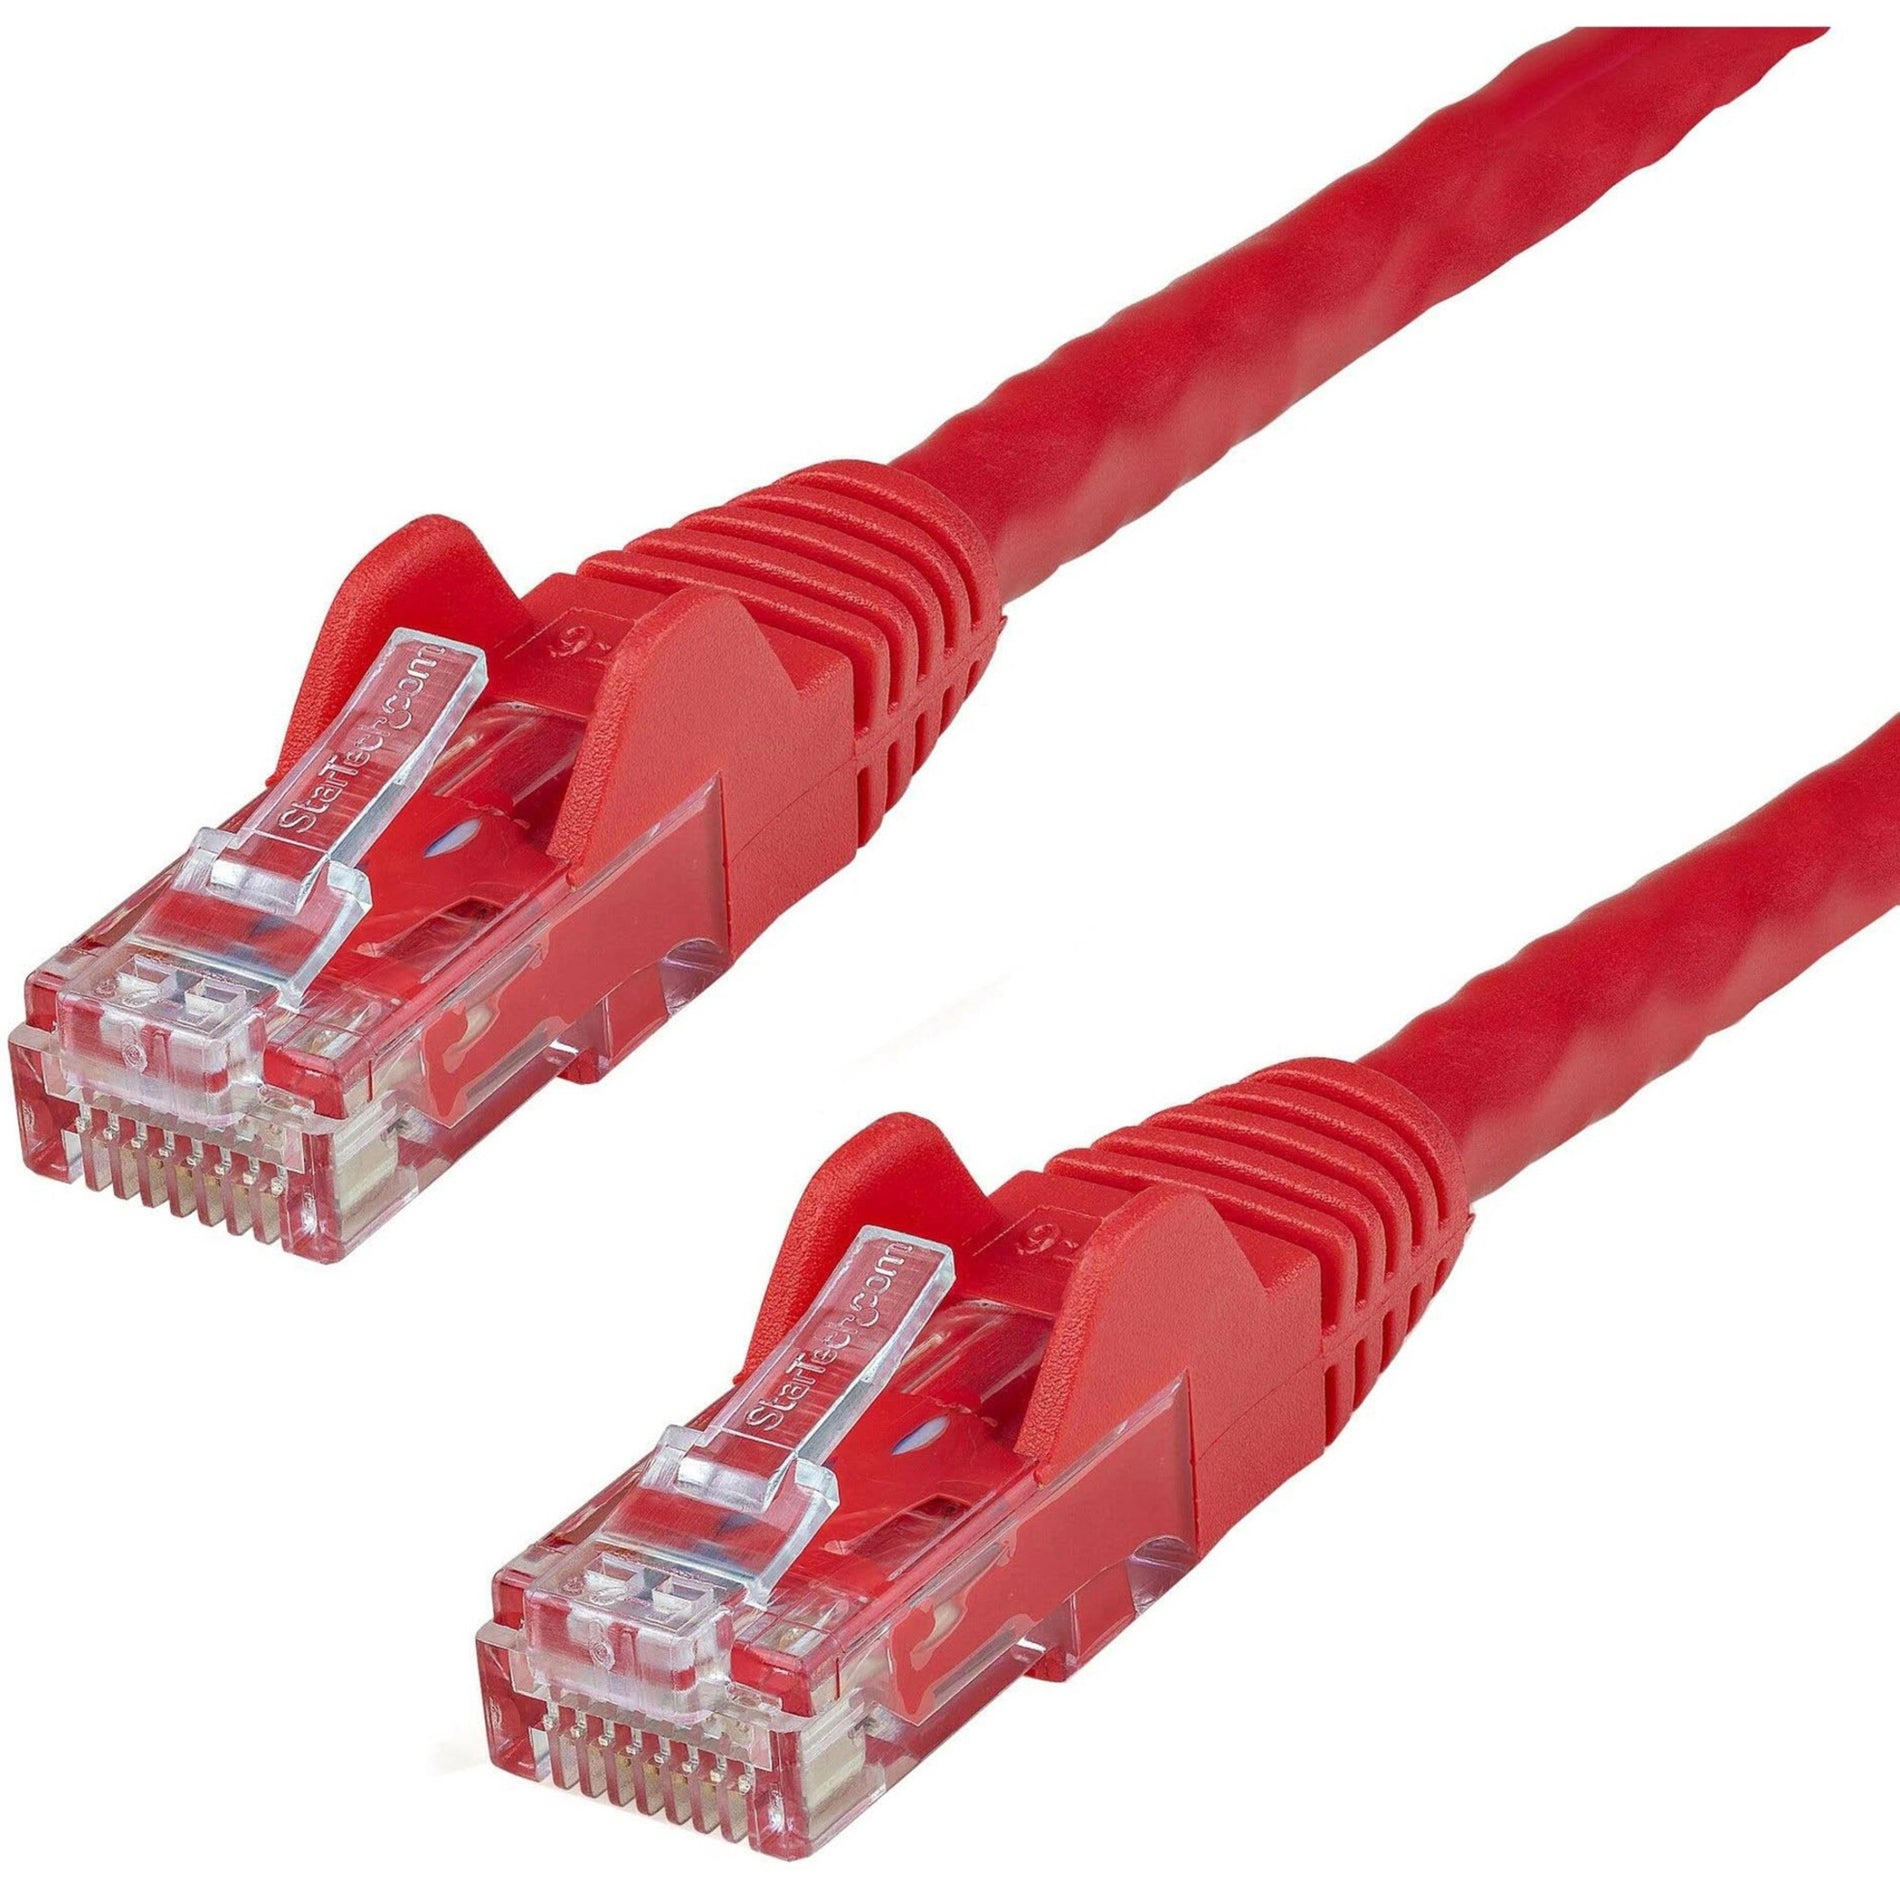 StarTech.com N6PATCH30RD Cat. 6 Network Cable, 30ft Red Ethernet Cable, Snagless RJ45 Connectors